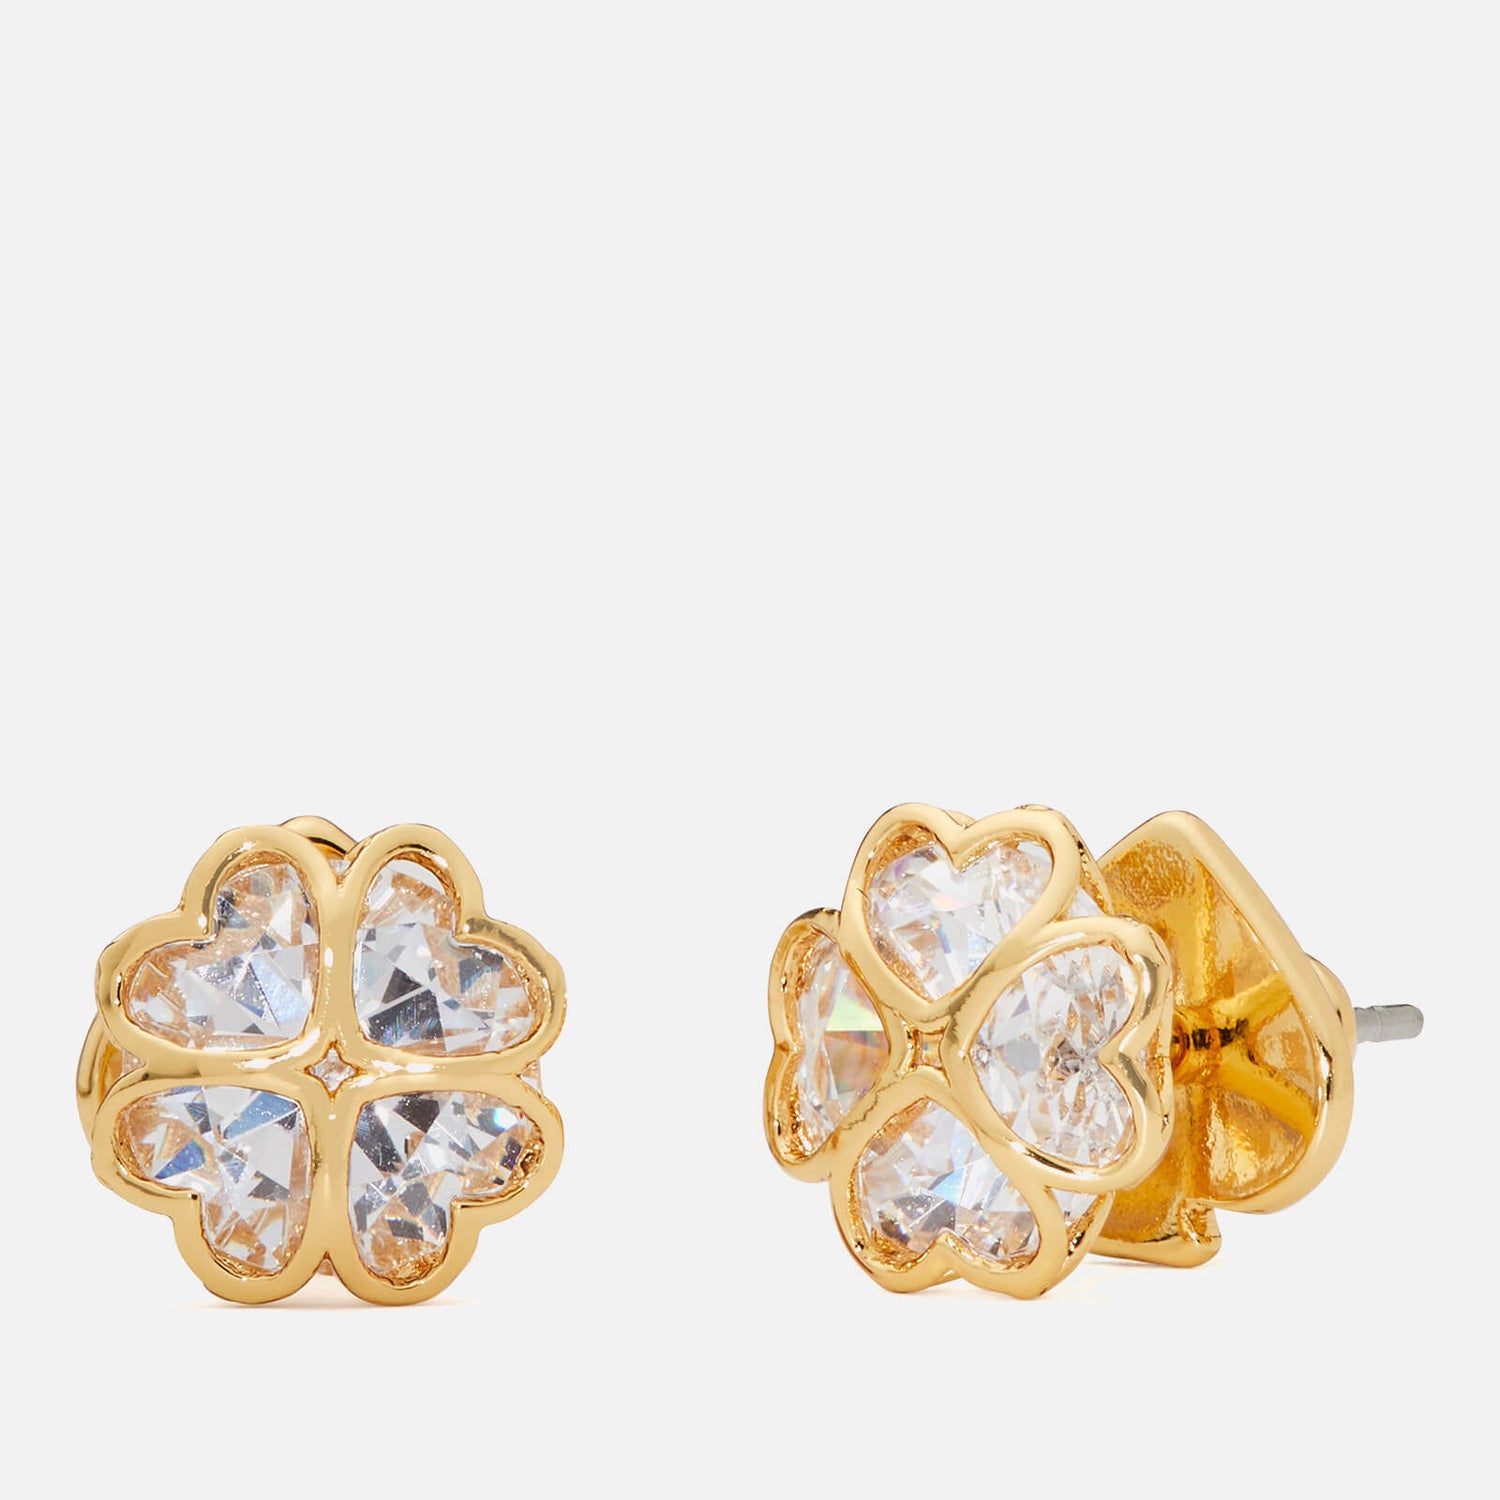 Kate Spade New York Women's Sparkly Spade Studs - Clear/Gold